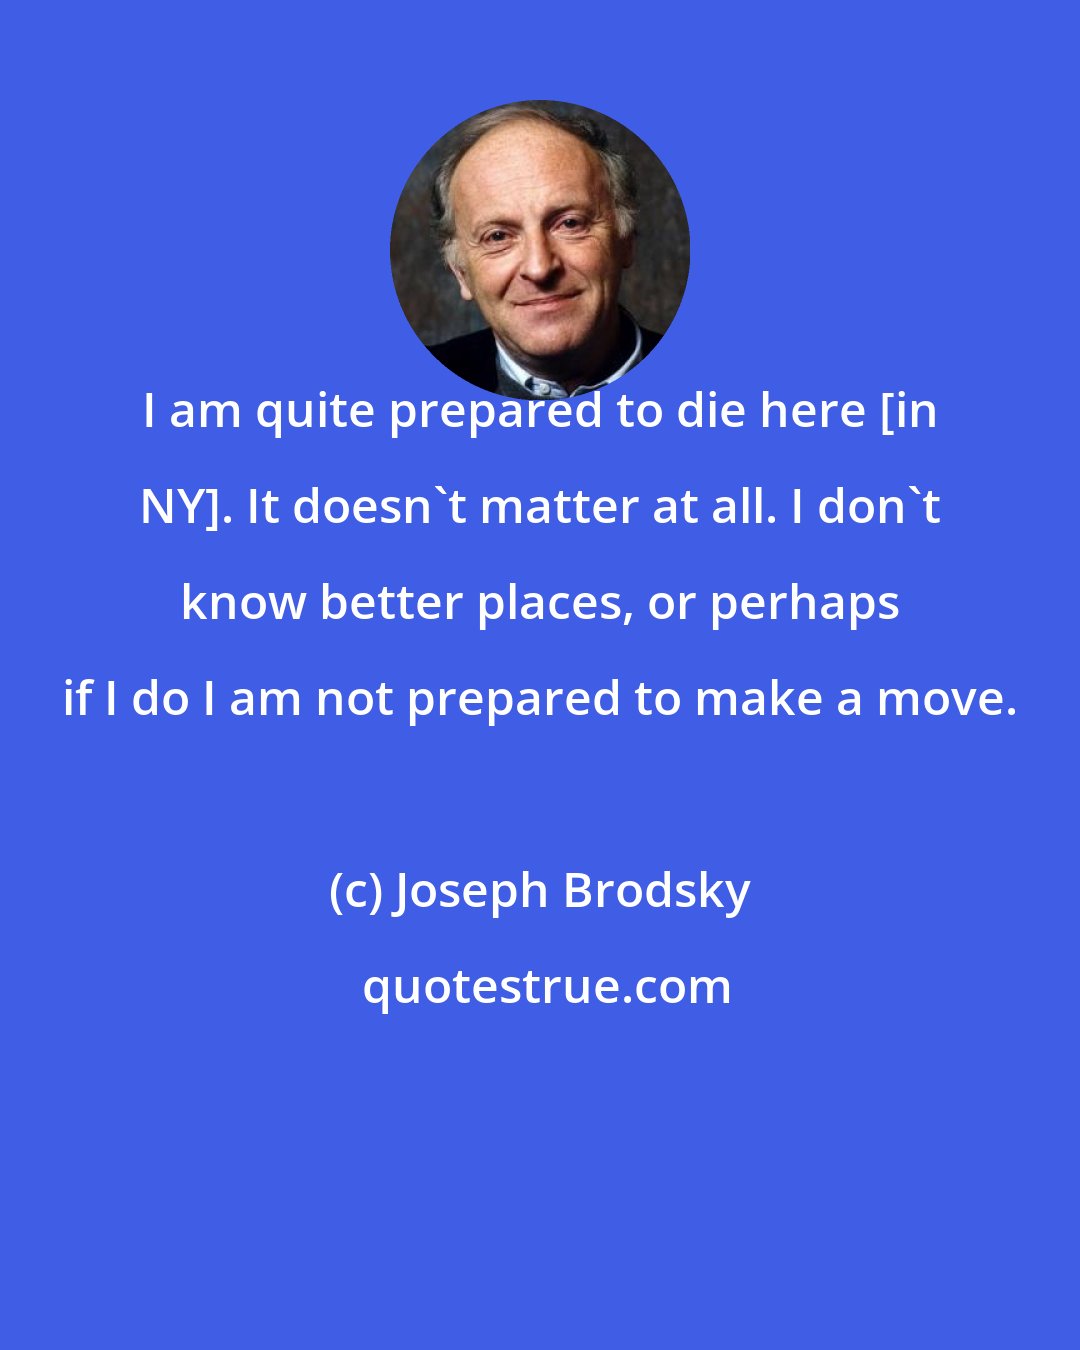 Joseph Brodsky: I am quite prepared to die here [in NY]. It doesn't matter at all. I don't know better places, or perhaps if I do I am not prepared to make a move.